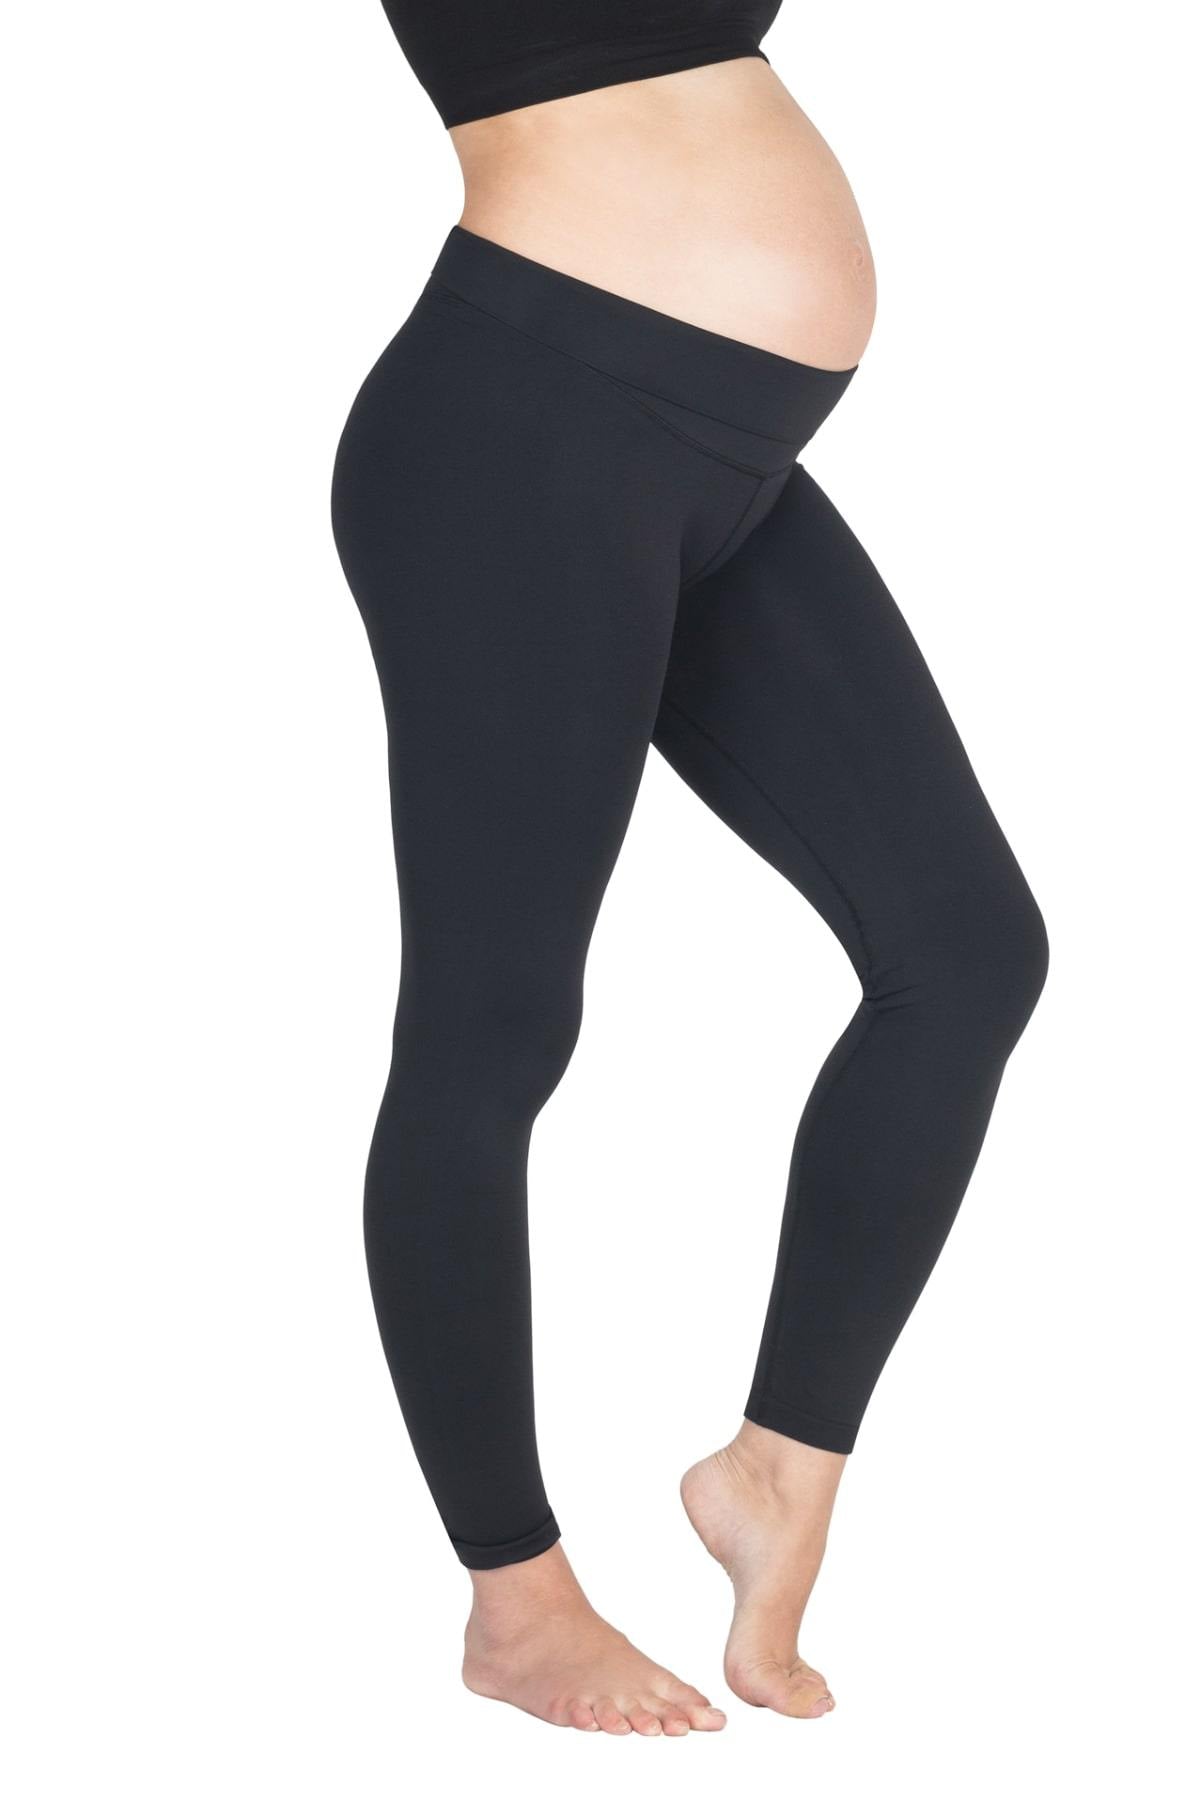 Women's Maternity Workout Leggings Over The Belly Pregnancy Yoga